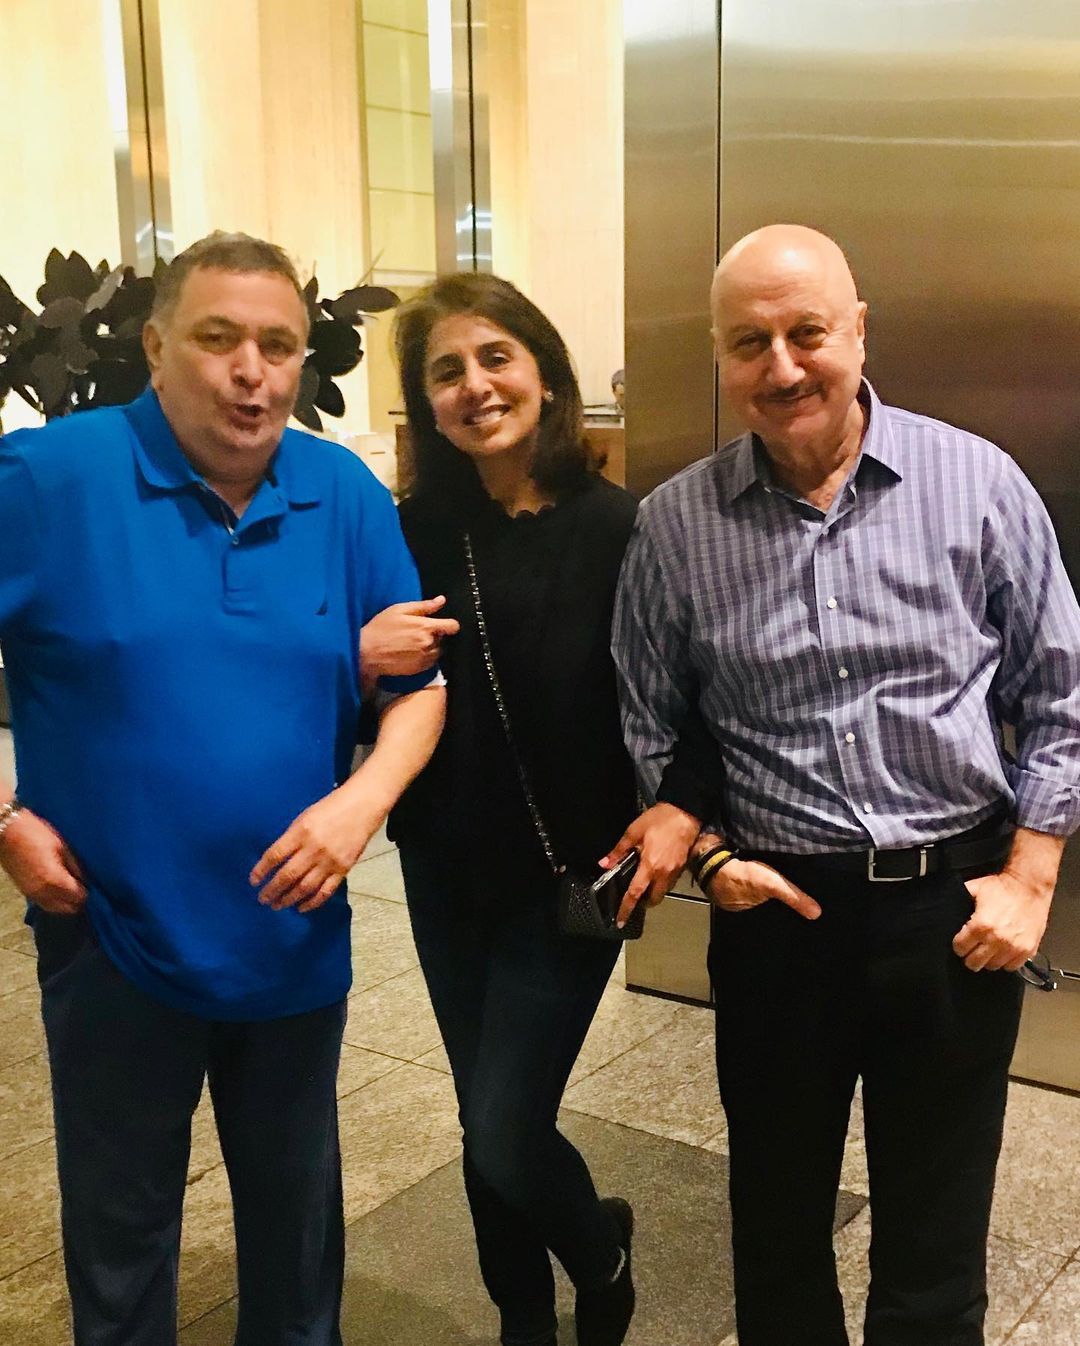 Anupam Kher Meets Neetu Kapoor In Chandigarh After Rishi Kapoor's Demise, Happy To See Her Get Back To Work